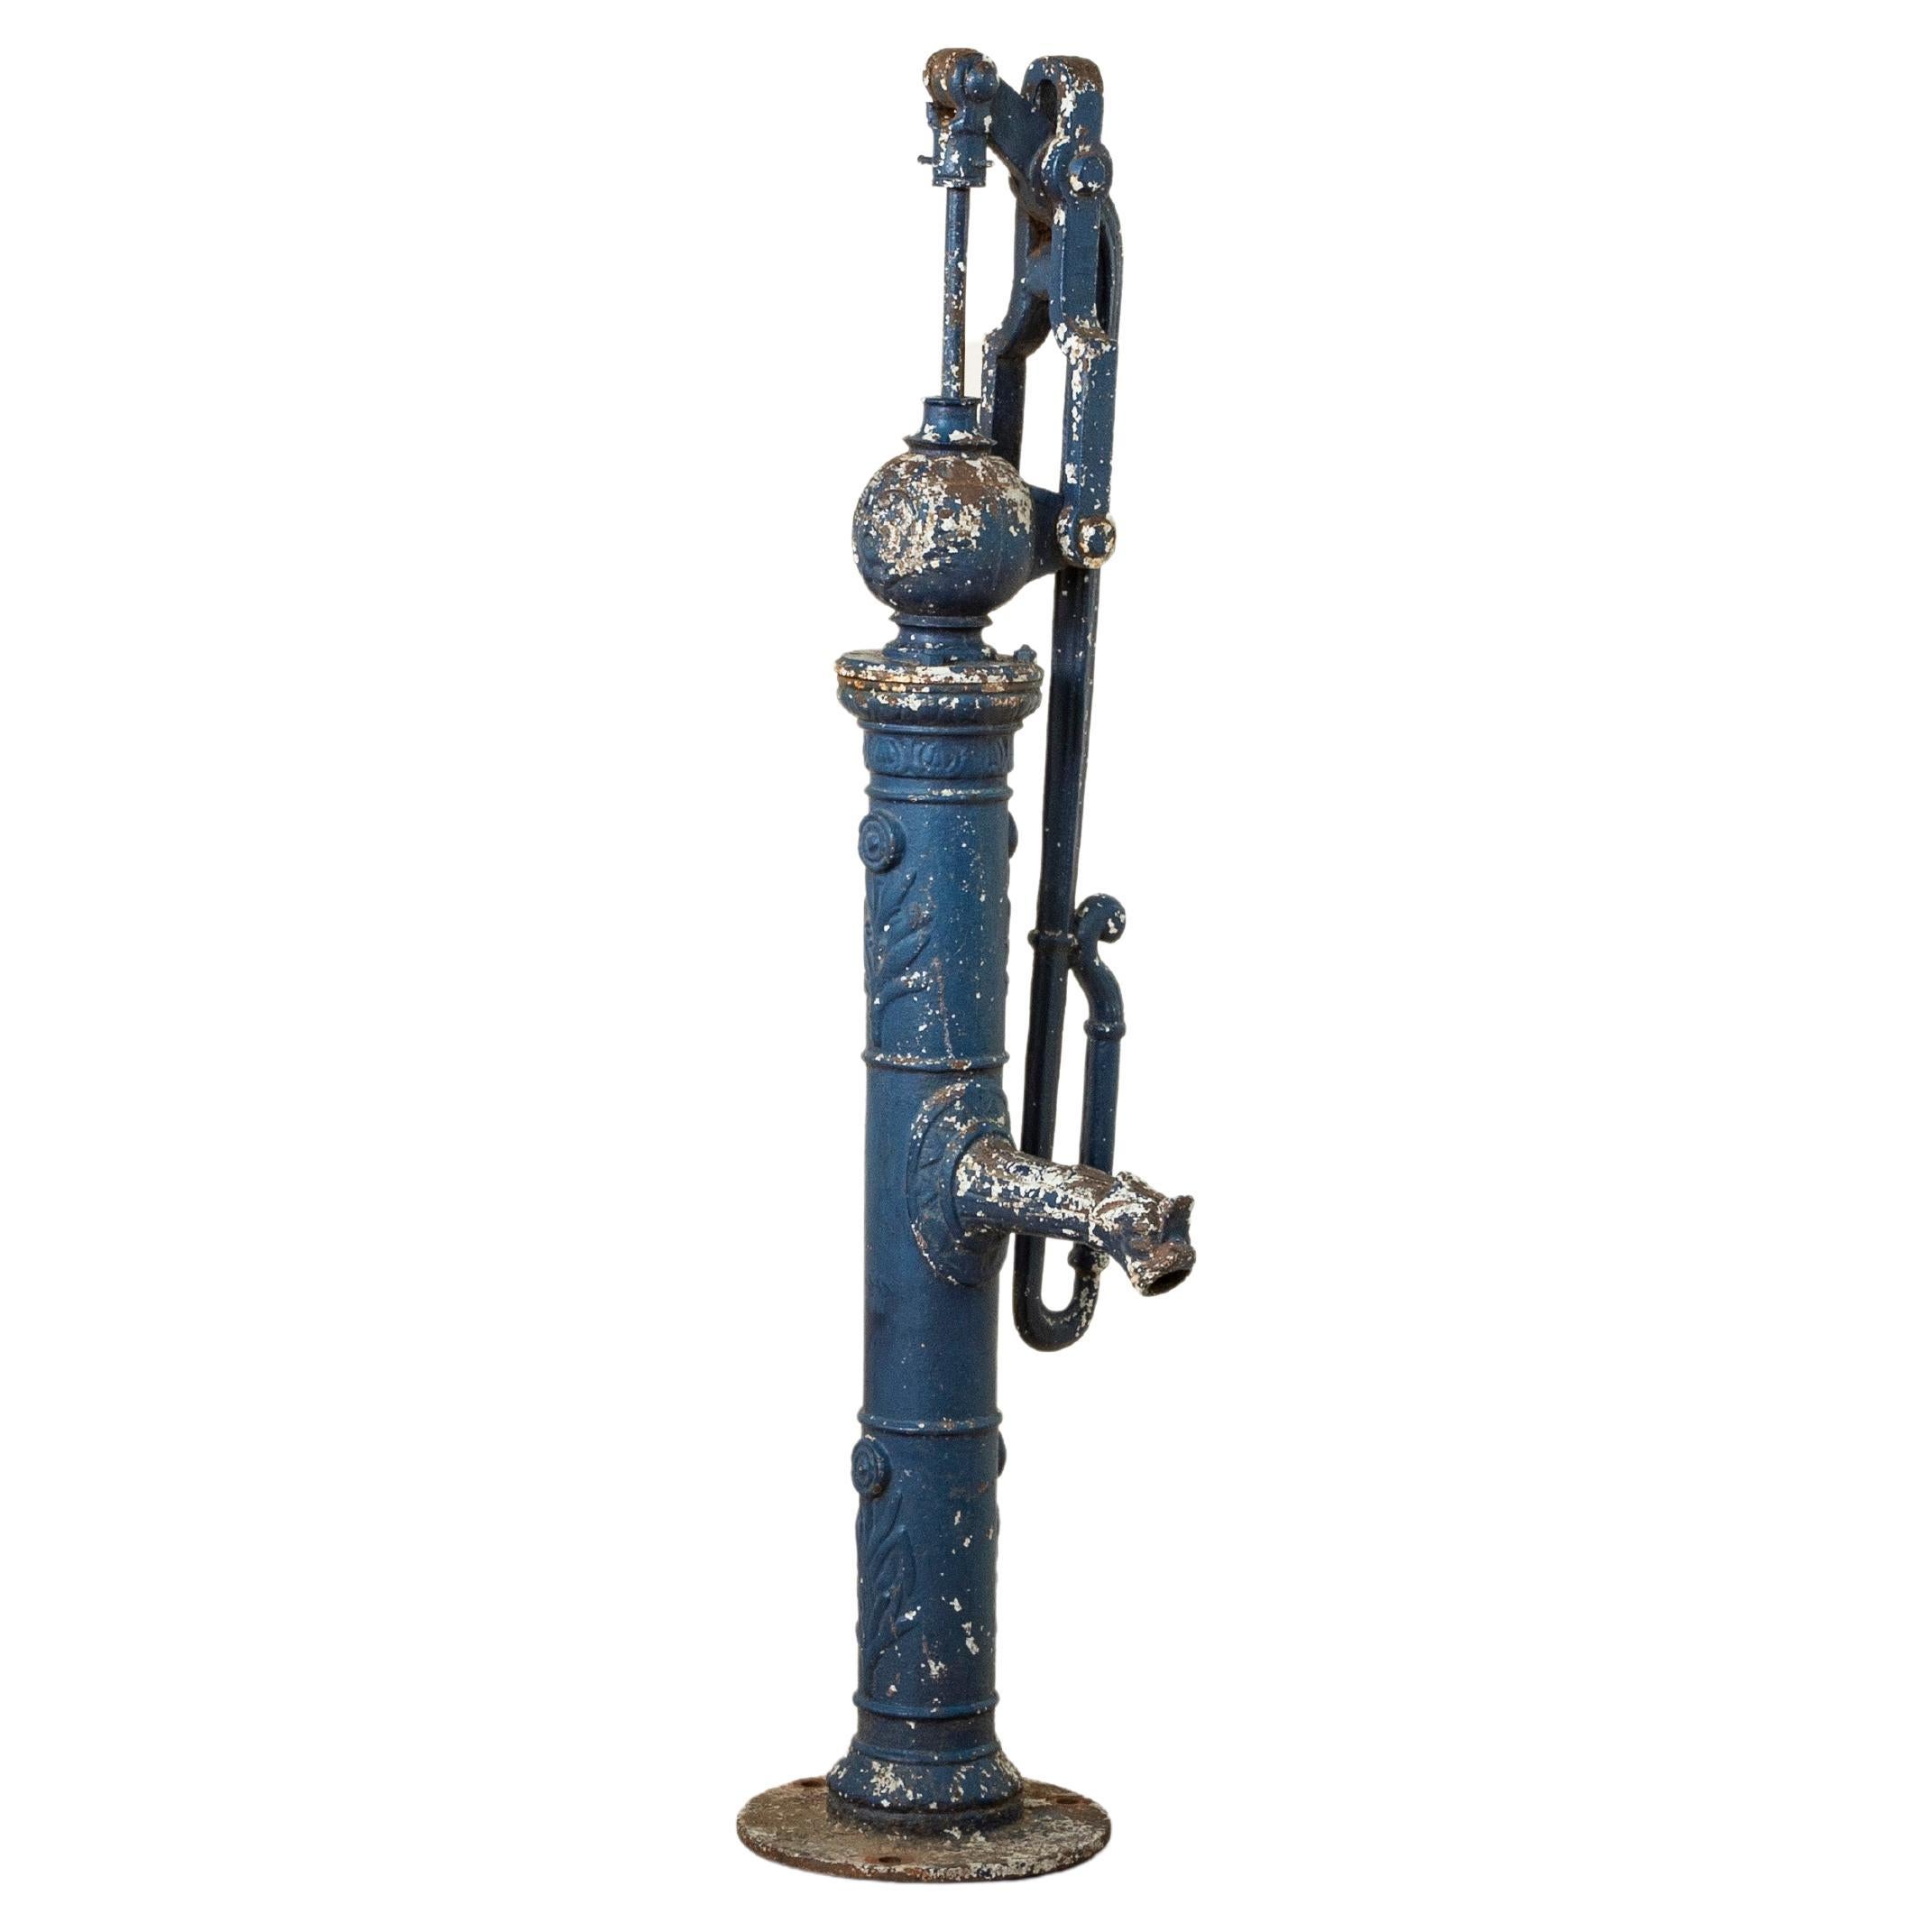 Mid-19th Century French Cast Iron Pump or Fountain from Normandy For Sale